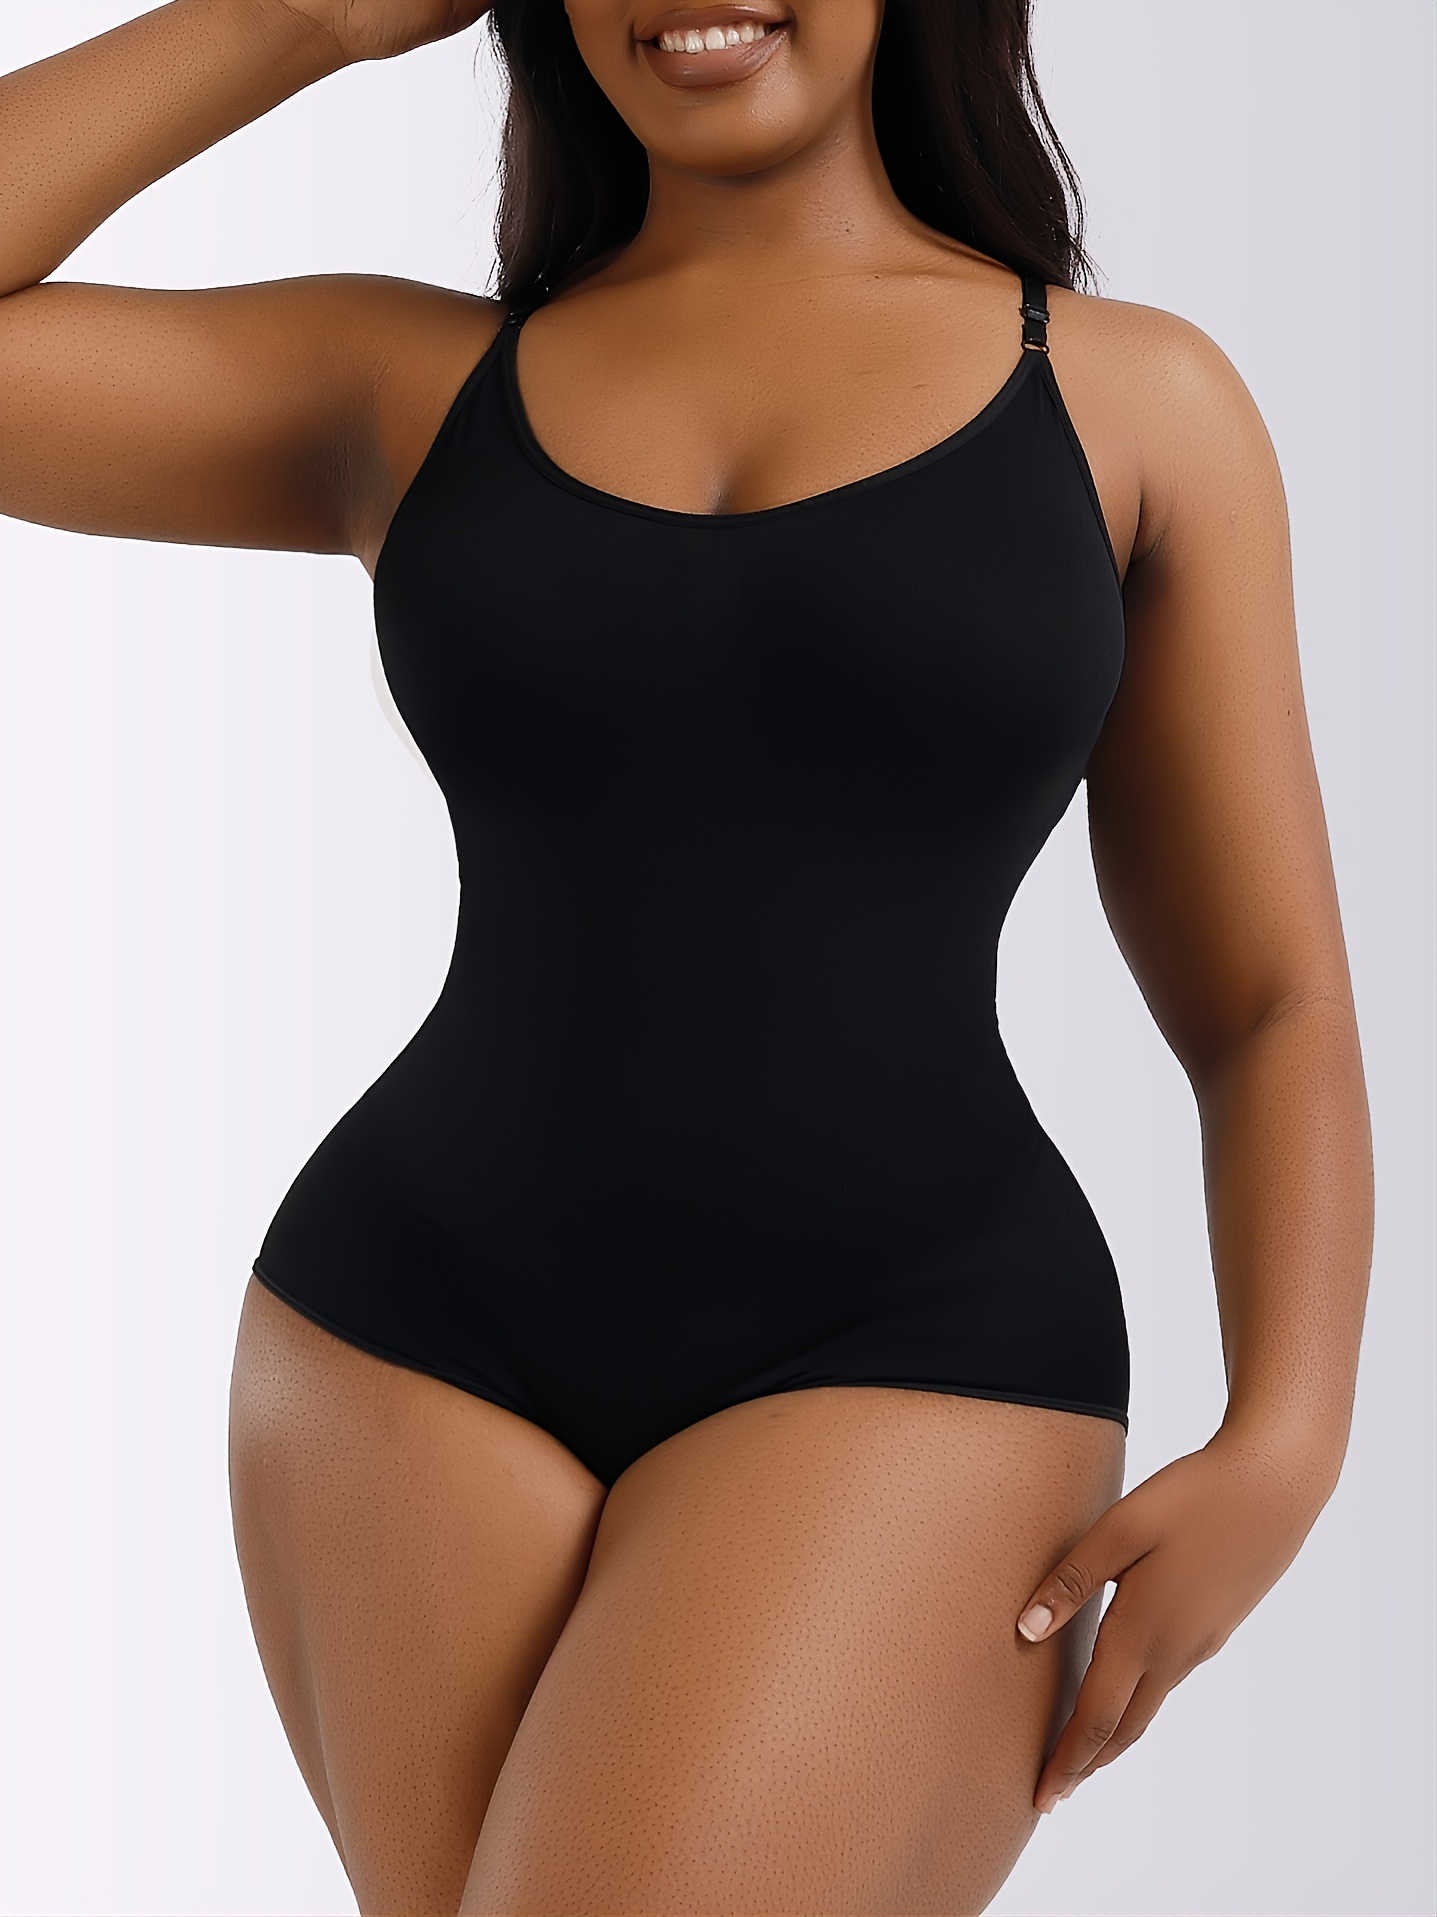 Cami Shaper is easy to wear - one piece curve hugging seamless design.  Magic pouch accommodates removable modesty pads for extra lift and